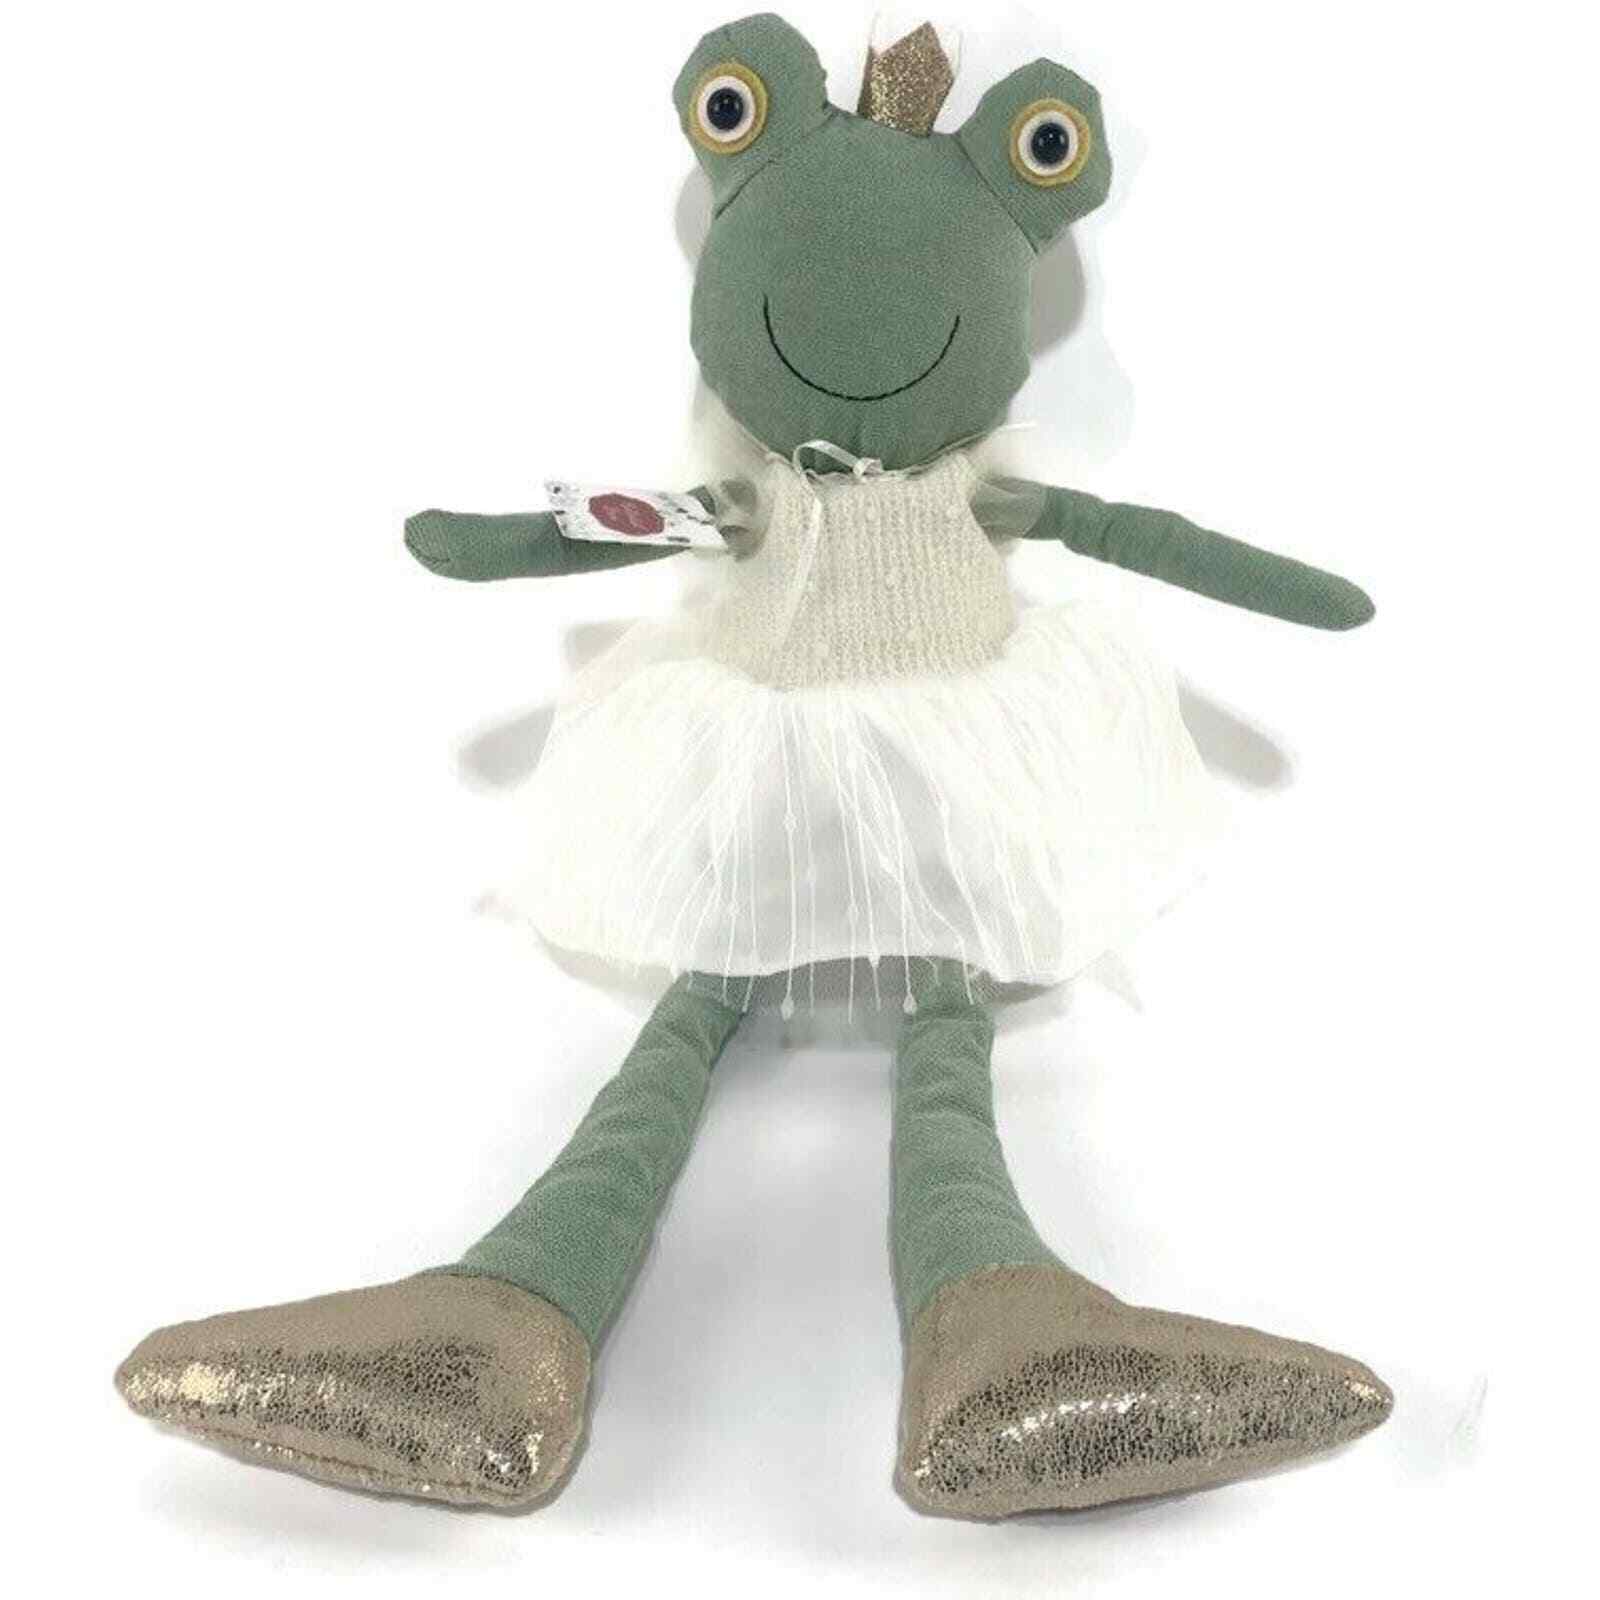  Cottontail Lane Dancing Ballerina Frog Plush 20 Inches Long New With Tag